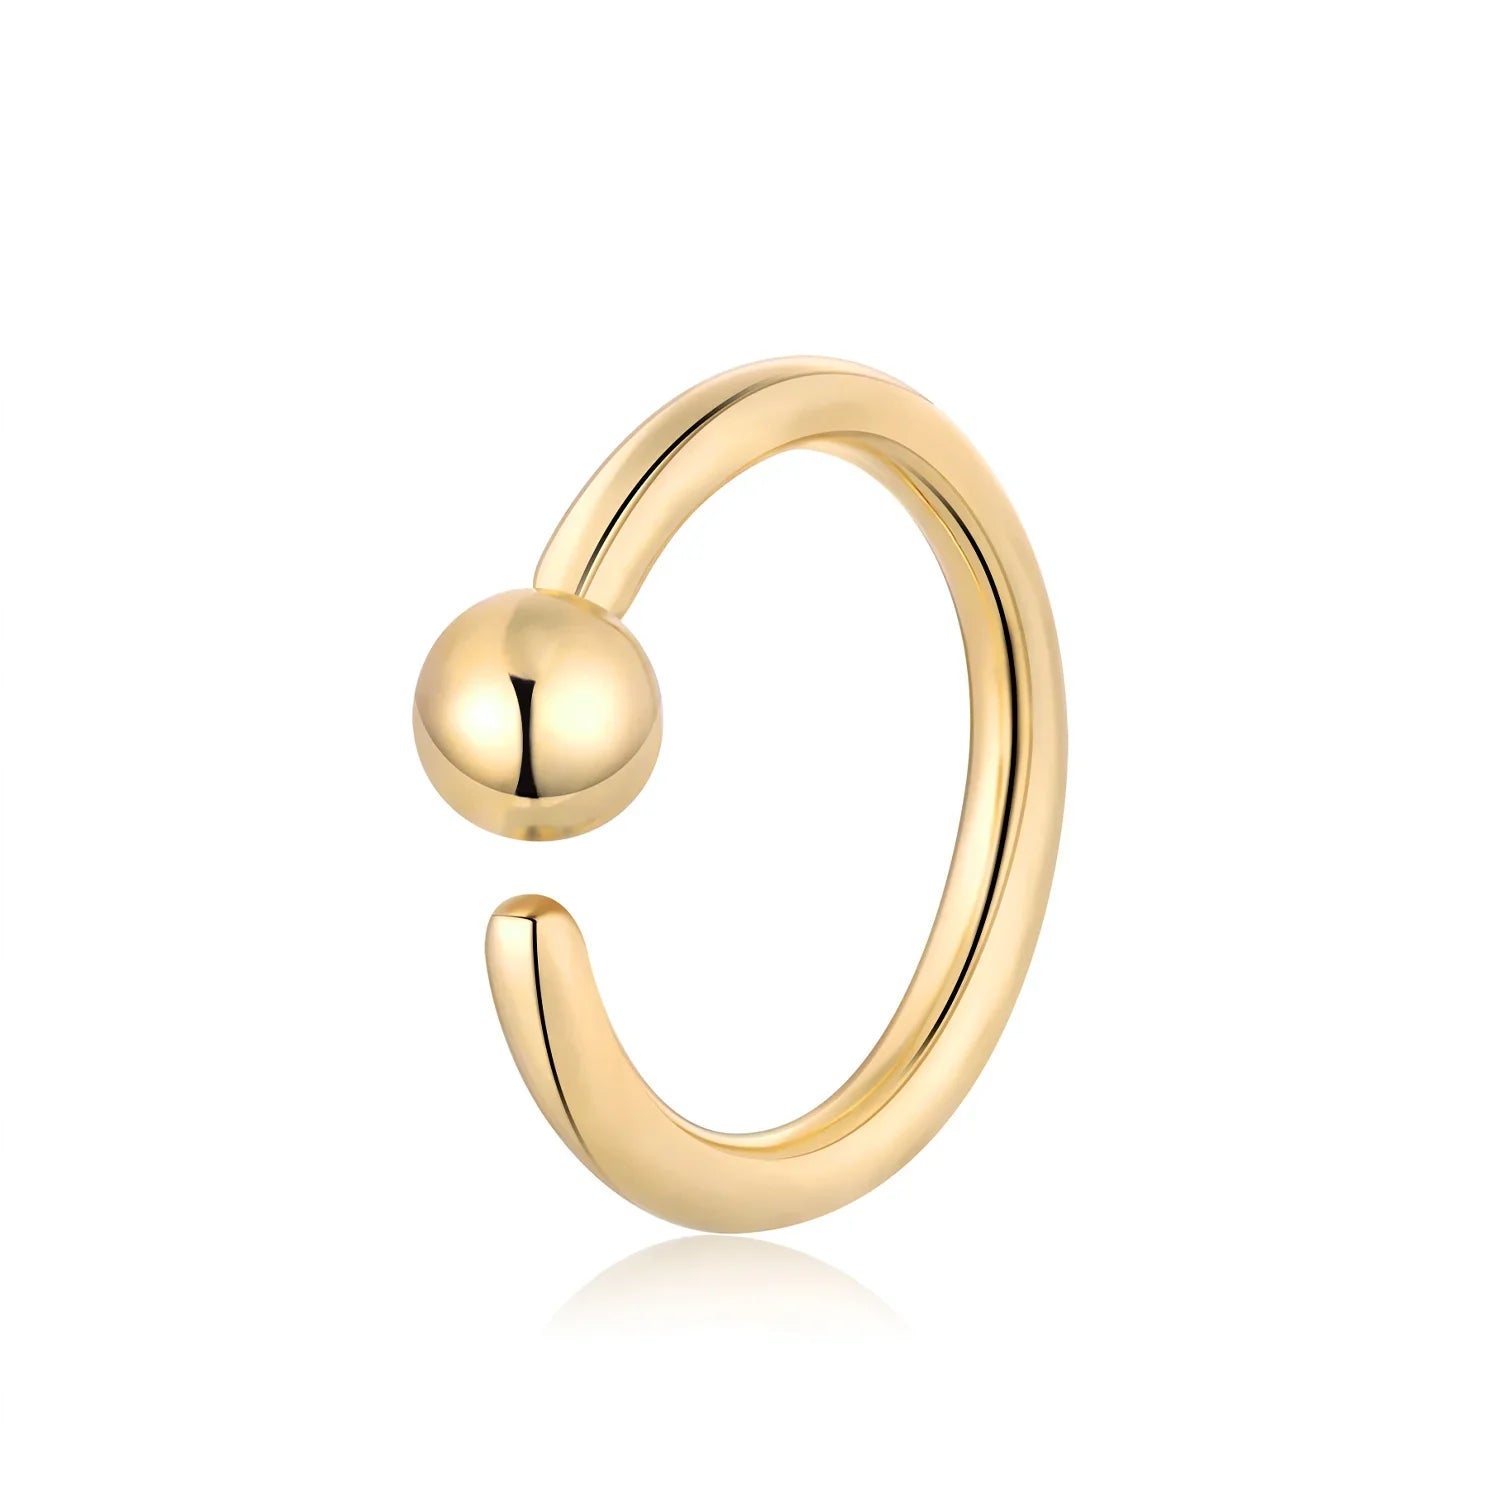 14K gold captive bead ring nose ring ear piercing 16G 8mm Ashley Piercing Jewelry